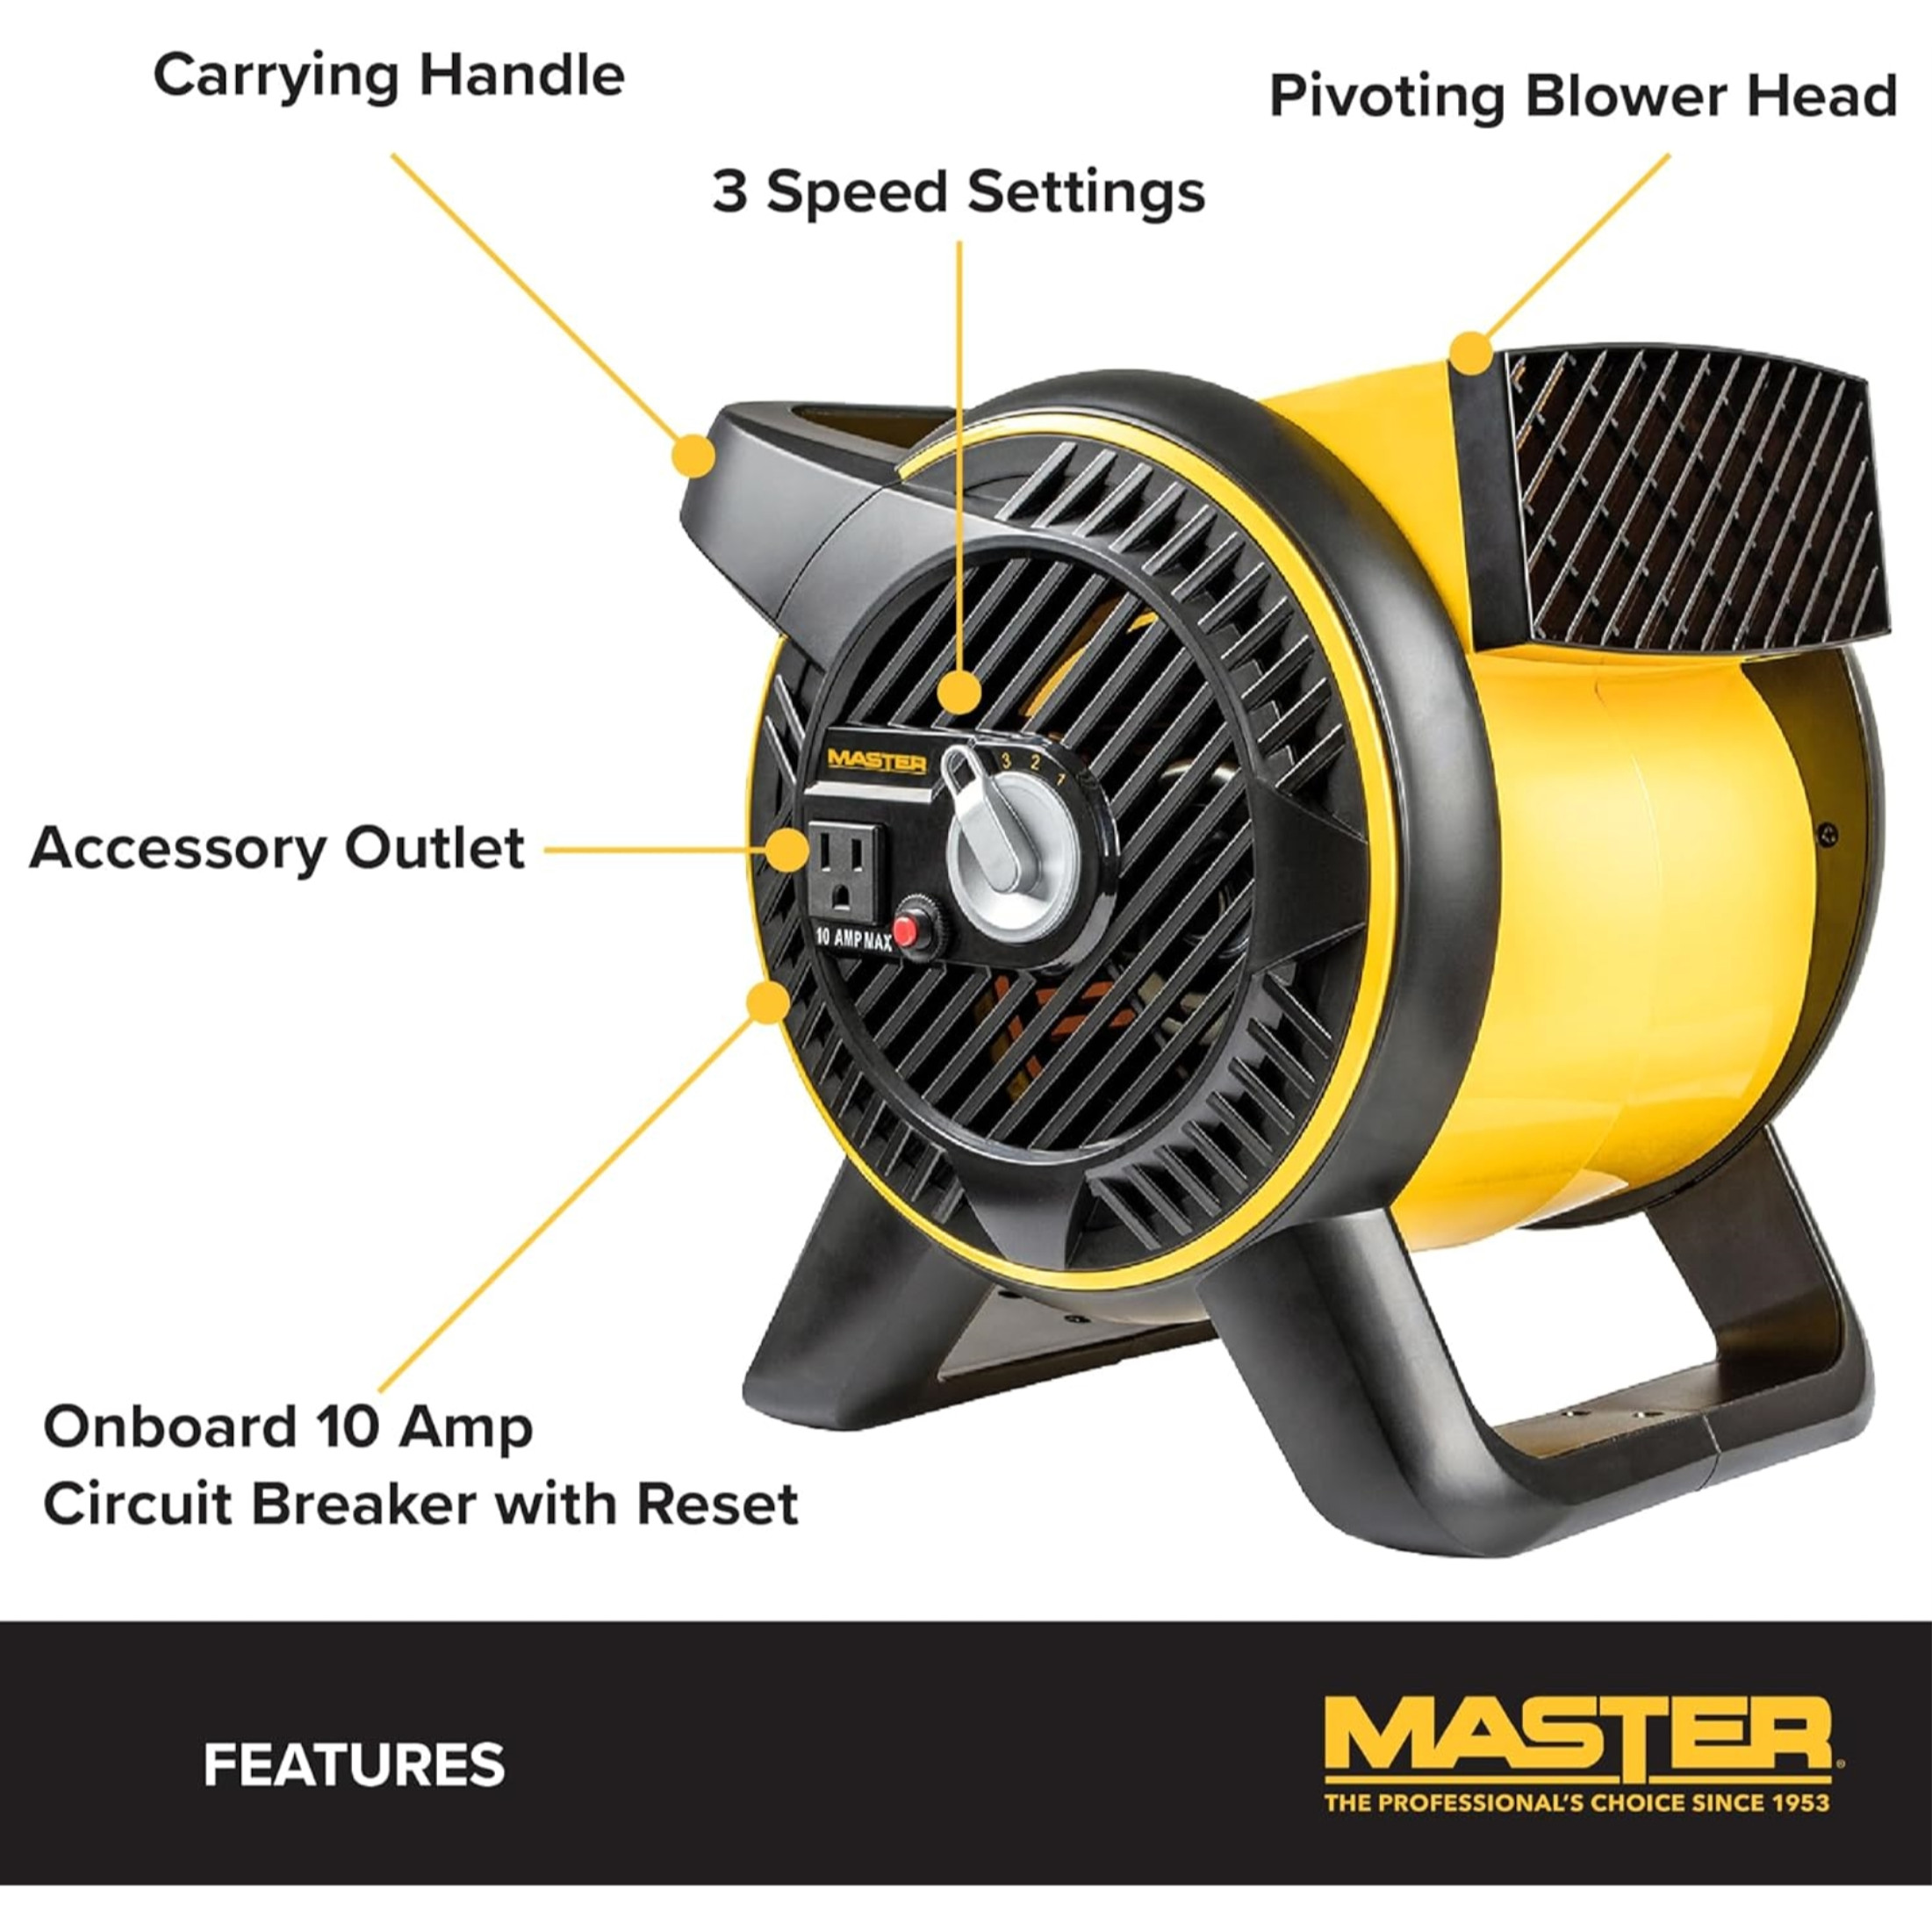 Master High Velocity Pivoting Head Blower Fan, Utility Air Mover for Drying or Ventilating Home or Construction Site, Daisy Chain Compatible, 3 Speed, 120 Volts